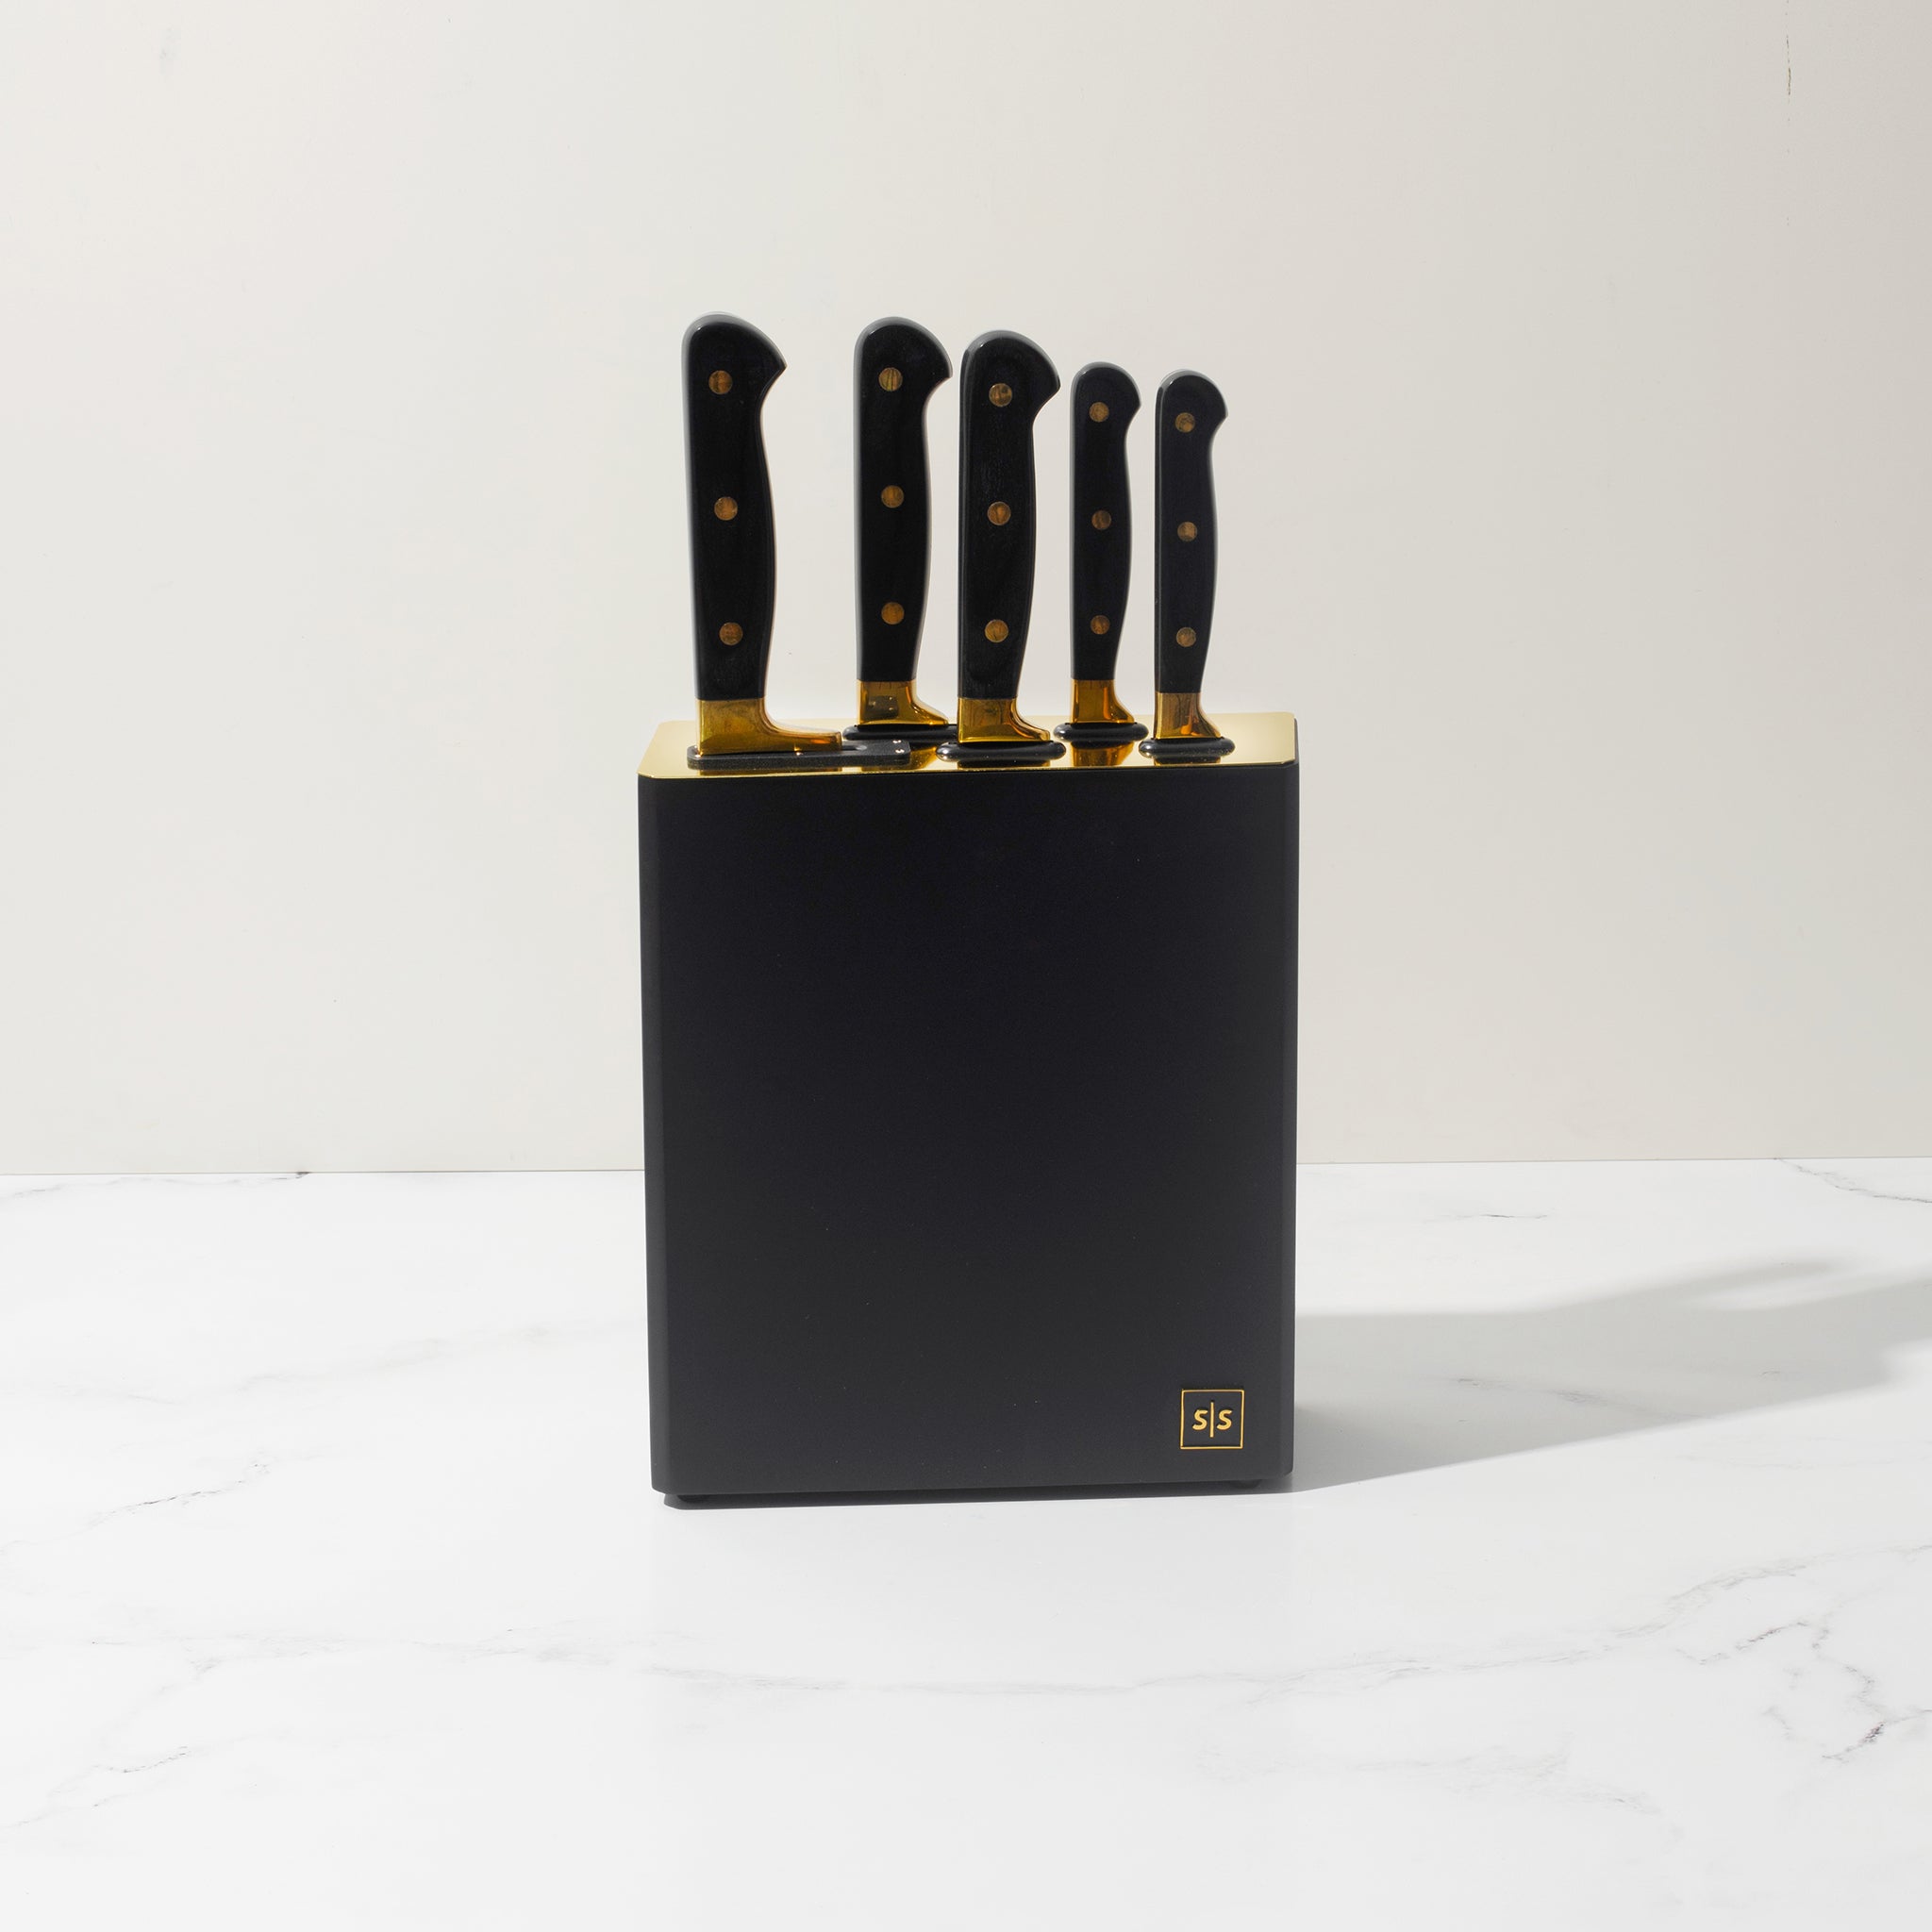 Styled Settings Black and Gold Knife Set with Knife Block and